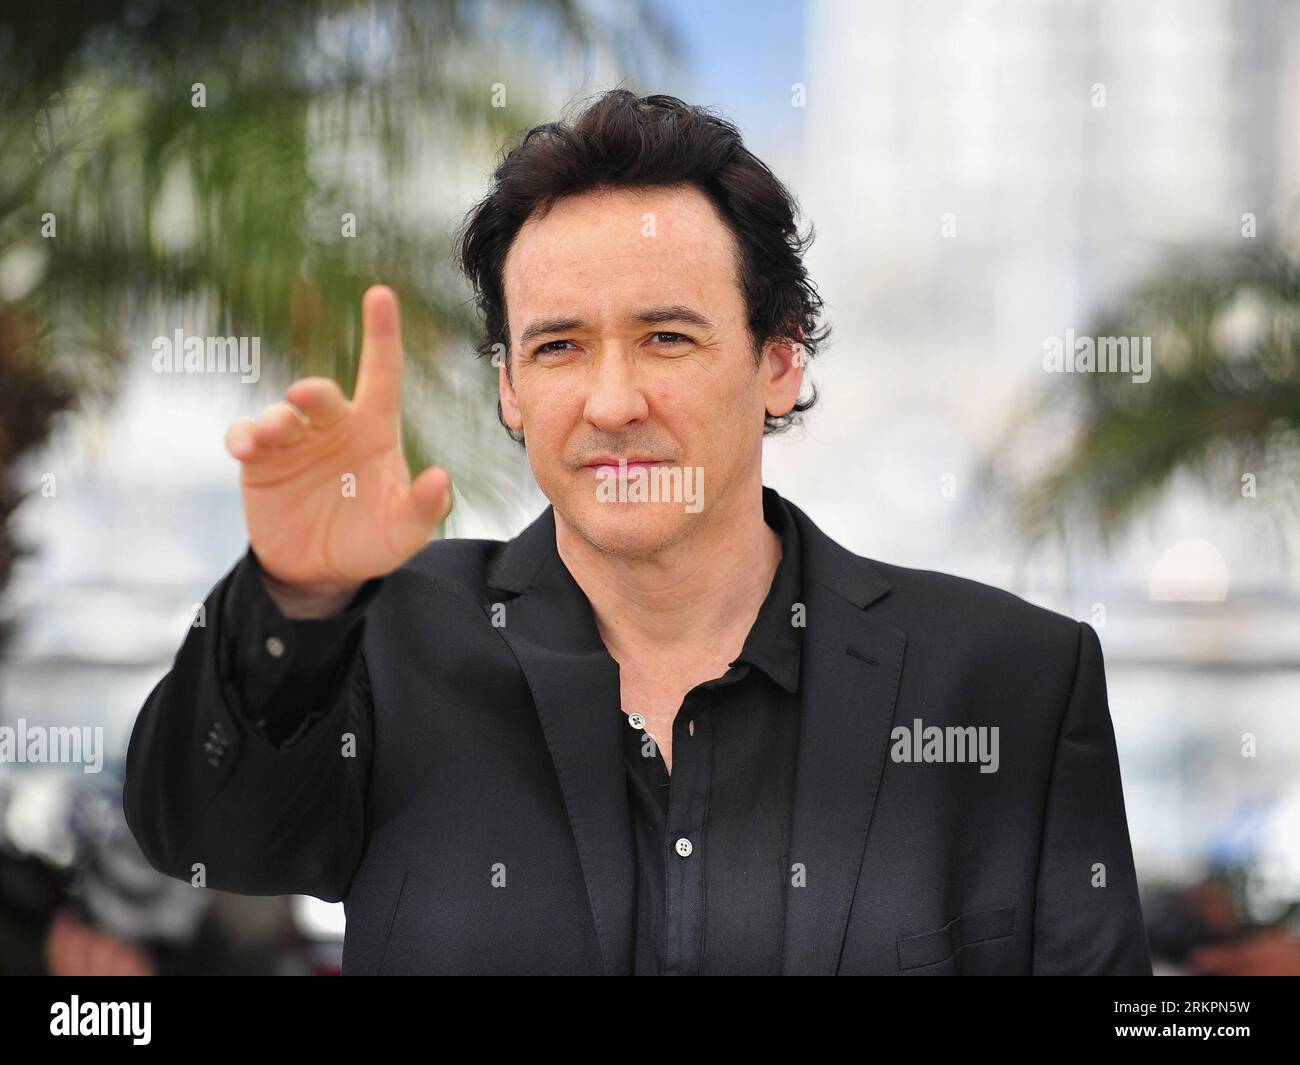 Bildnummer: 58030786  Datum: 24.05.2012  Copyright: imago/Xinhua (120524) -- CANNES, May 24, 2012 (Xinhua) -- Actor John Cusack poses during a photocall for the film The Paperboy directed by Lee Daniels, at the 65th Cannes Film Festival, in Cannes, southern France, May 24, 2012. (Xinhua/Ye Pingfan)(srb) FRANCE-CANNES-FILM FESTIVAL-PHOTOCALL-THE PAPERBOY PUBLICATIONxNOTxINxCHN Kultur Entertainment People Film 65. Internationale Filmfestspiele Cannes Porträt x0x xkg 2012 quer      58030786 Date 24 05 2012 Copyright Imago XINHUA  Cannes May 24 2012 XINHUA Actor John Cusack Poses during a photo ca Stock Photo